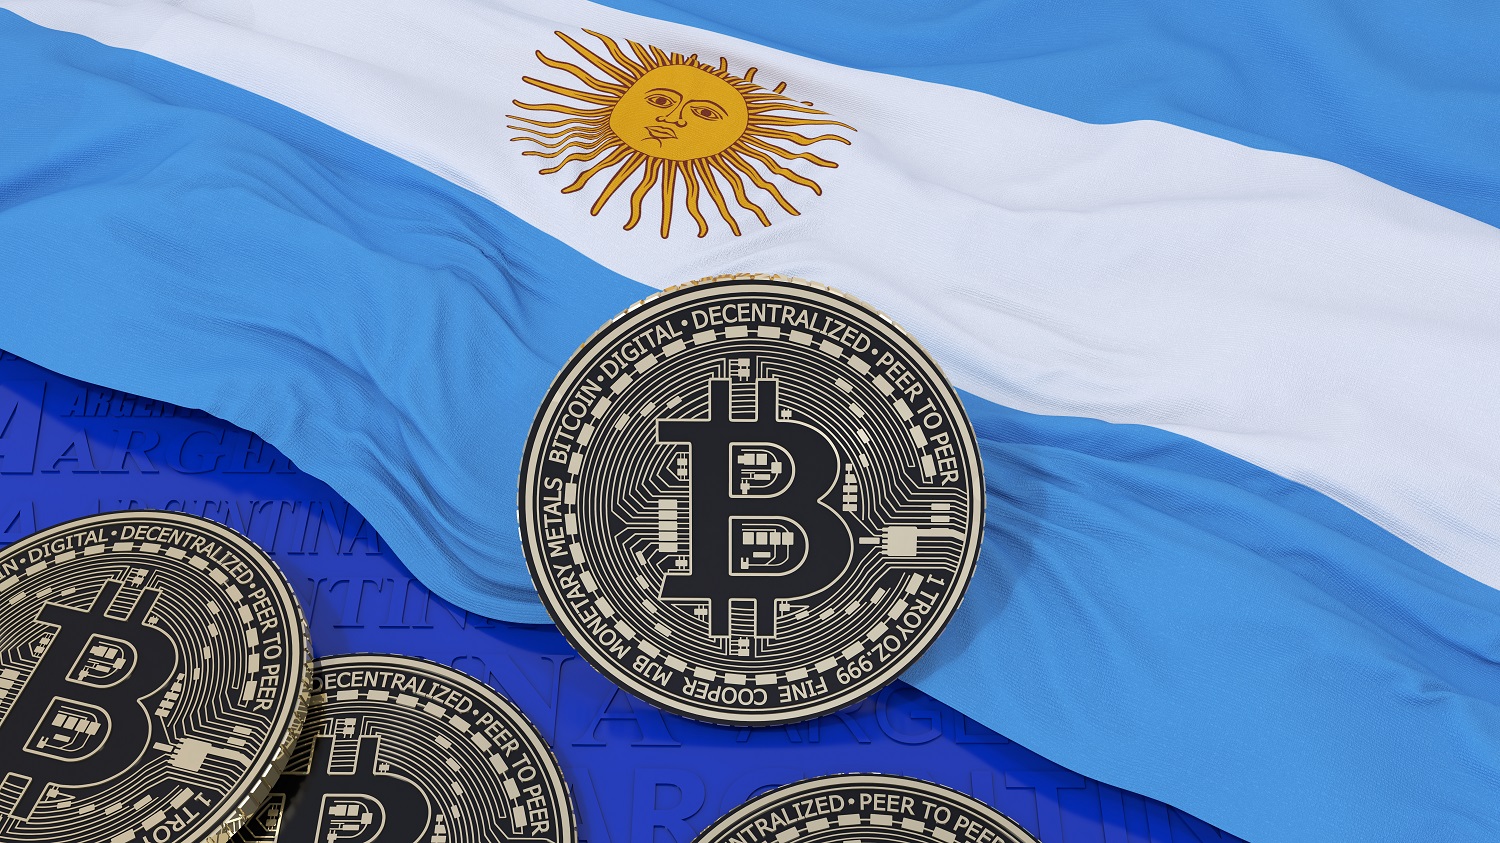 A number of metal coins intended to represent Bitcoin tokens rest on the Argentinian flag.